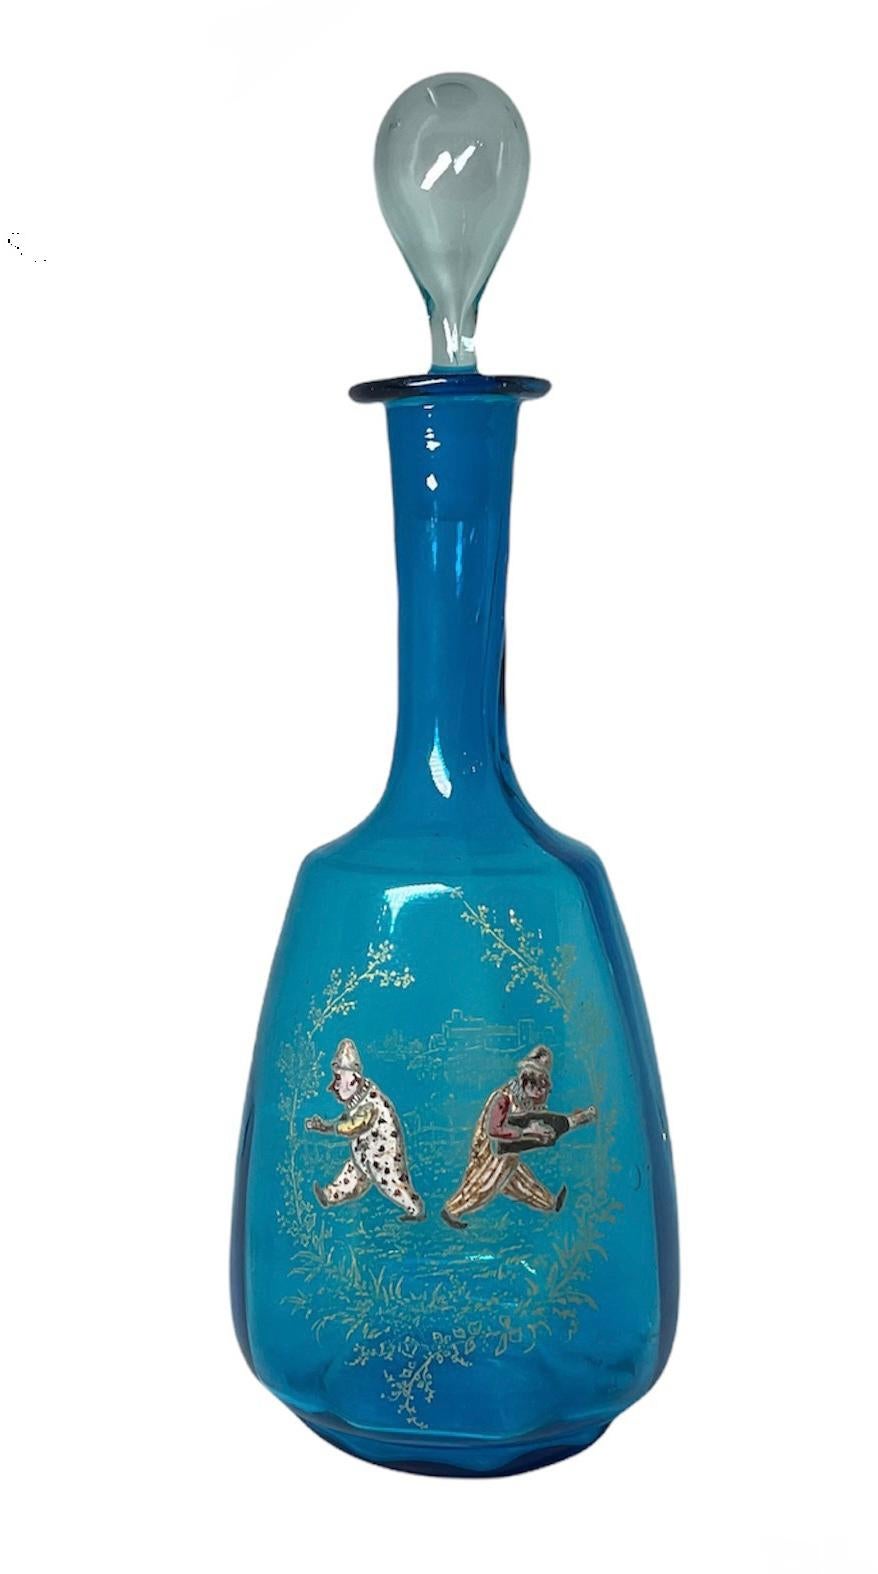 This is a Theodore Rossler bohemian hand blown royal blue glass wine decanter. It depicts two clowns walking in opposite direction in a country landscape with a wood fence and some foliage around them, using the “Color Cake” enamel technique. One of